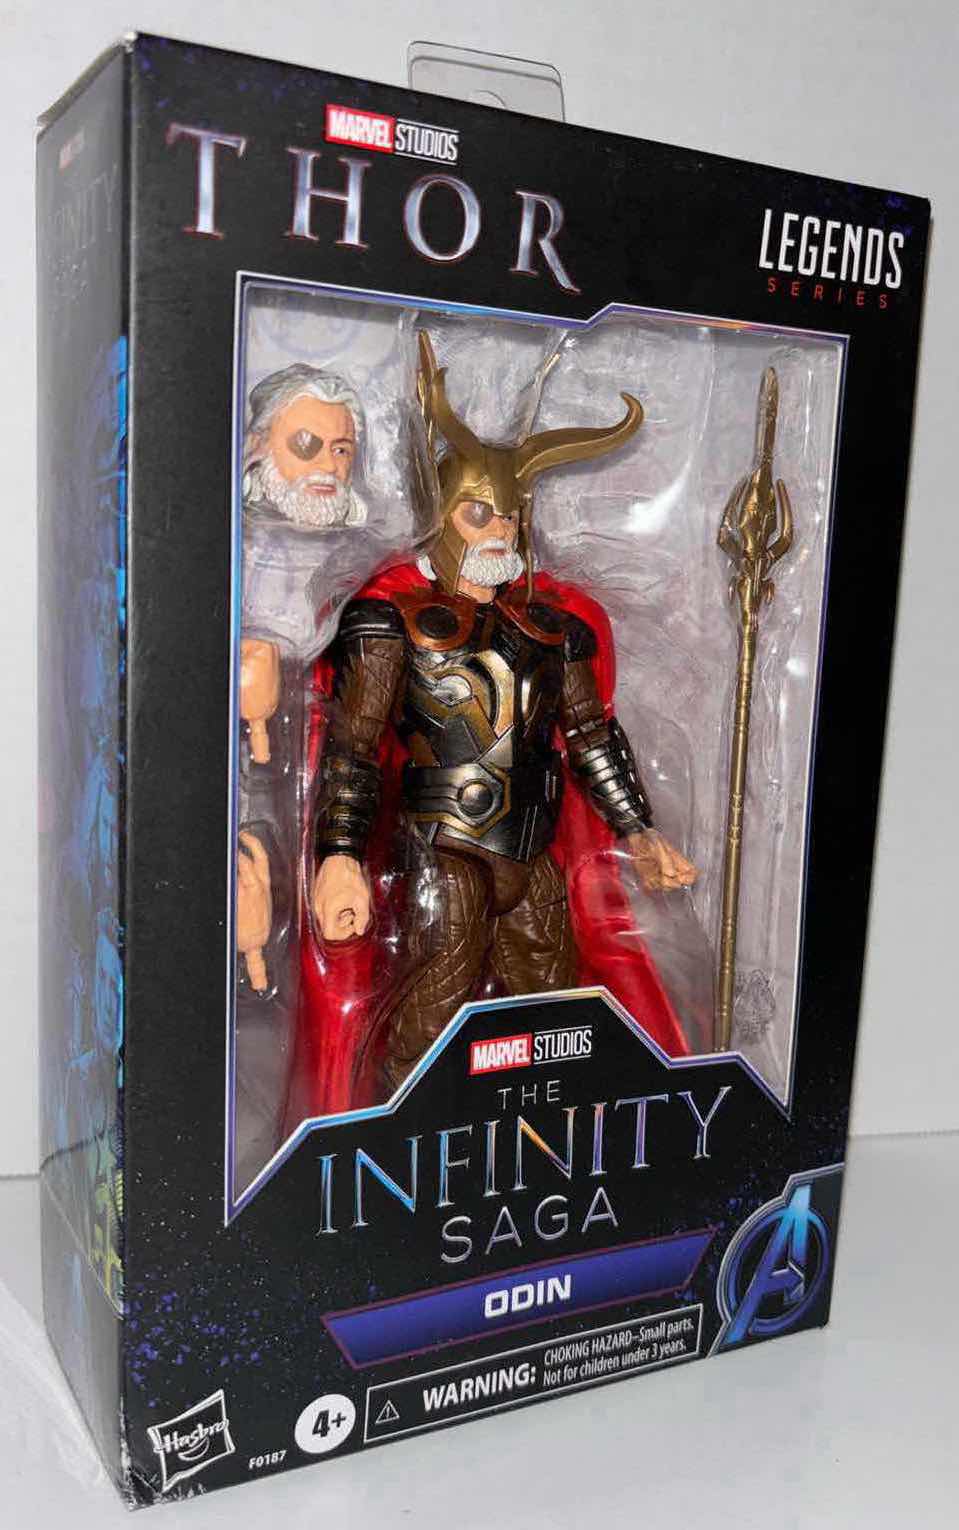 Photo 1 of NEW MARVEL STUDIOS THOR LEGENDS SERIES ACTION FIGURE & ACCESSORIES, THE INFINITY SAGA “ODIN” (1)